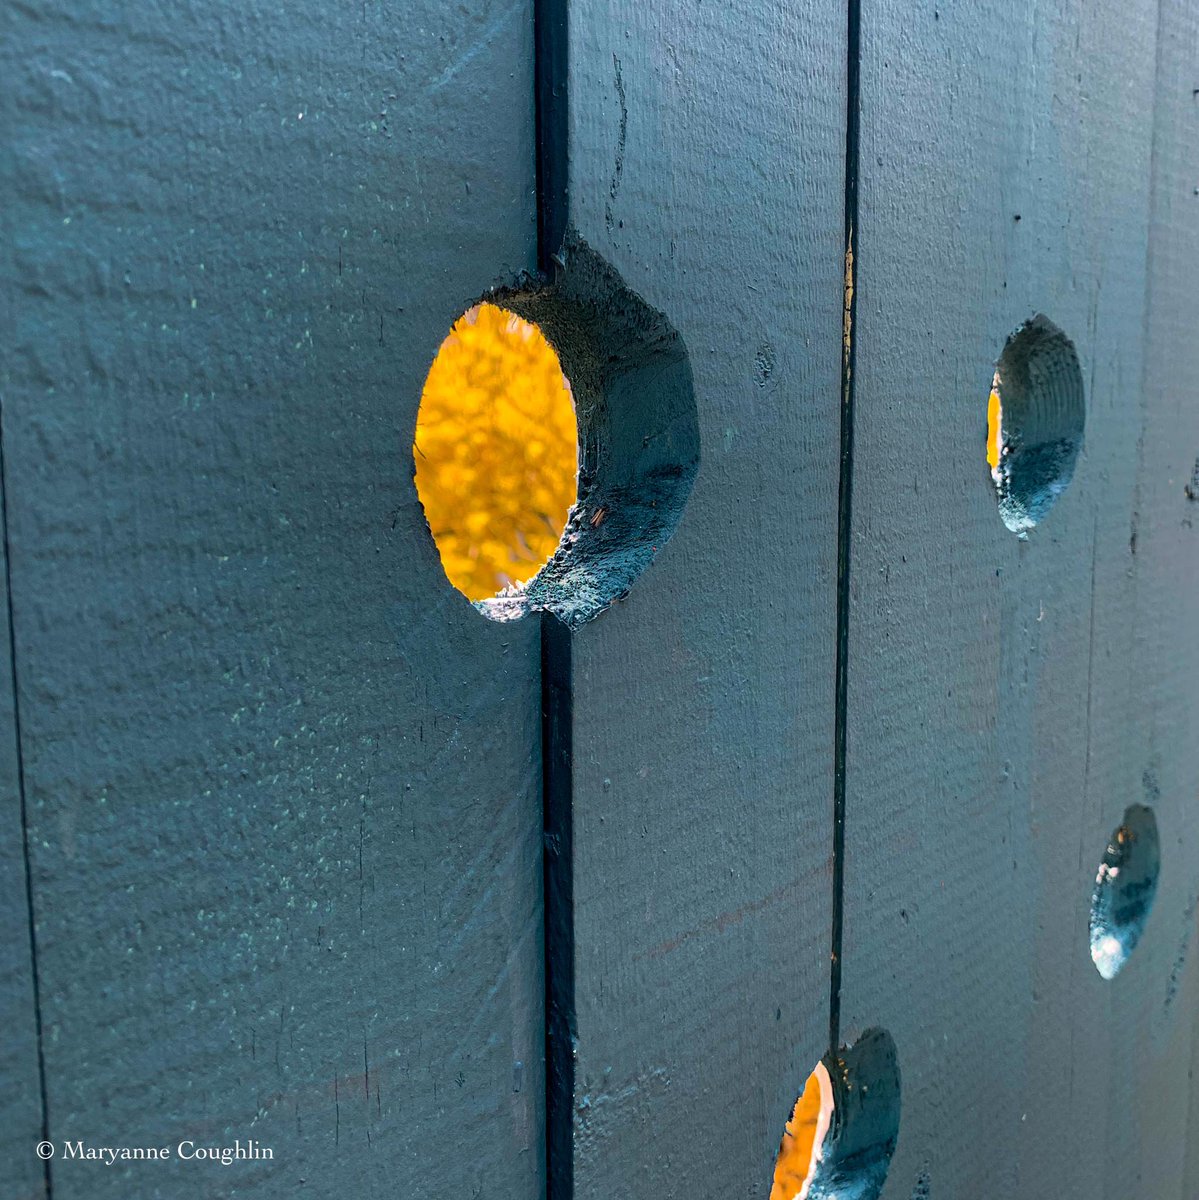 Fence with a view. Love the colors 💙🌼 What’s your fav color combination?

#momentsofbeauty #beautiful #colorful #massachusetts #newengland 
#streetphotography #colorcaptures 
#newenglandpictures #roadtripnewengland #wallstalking #streetphoto #thephotohour @LensAreLive @PicPoet